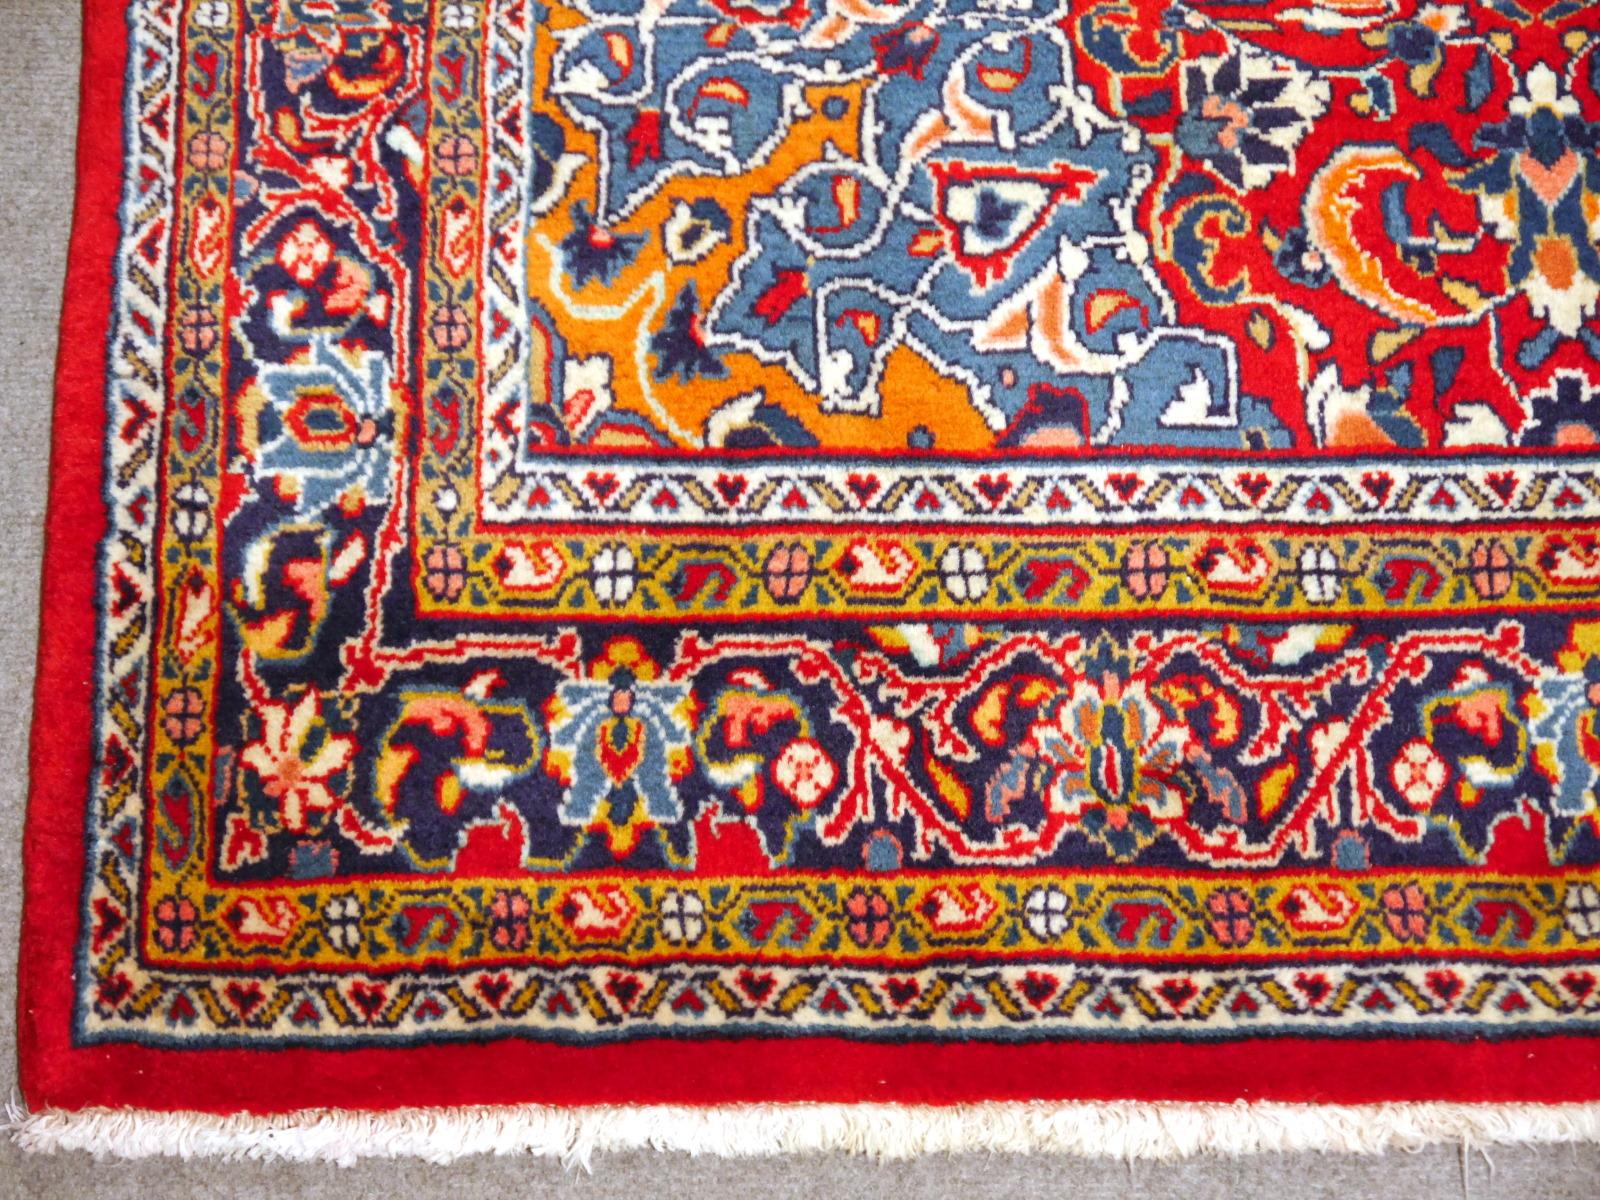 A hand-knotted Oriental rug in red and blue, made in the 1970s. Pile is pure wool, warp and weft is cotton. The rug is in very good condition with vibrant colors.